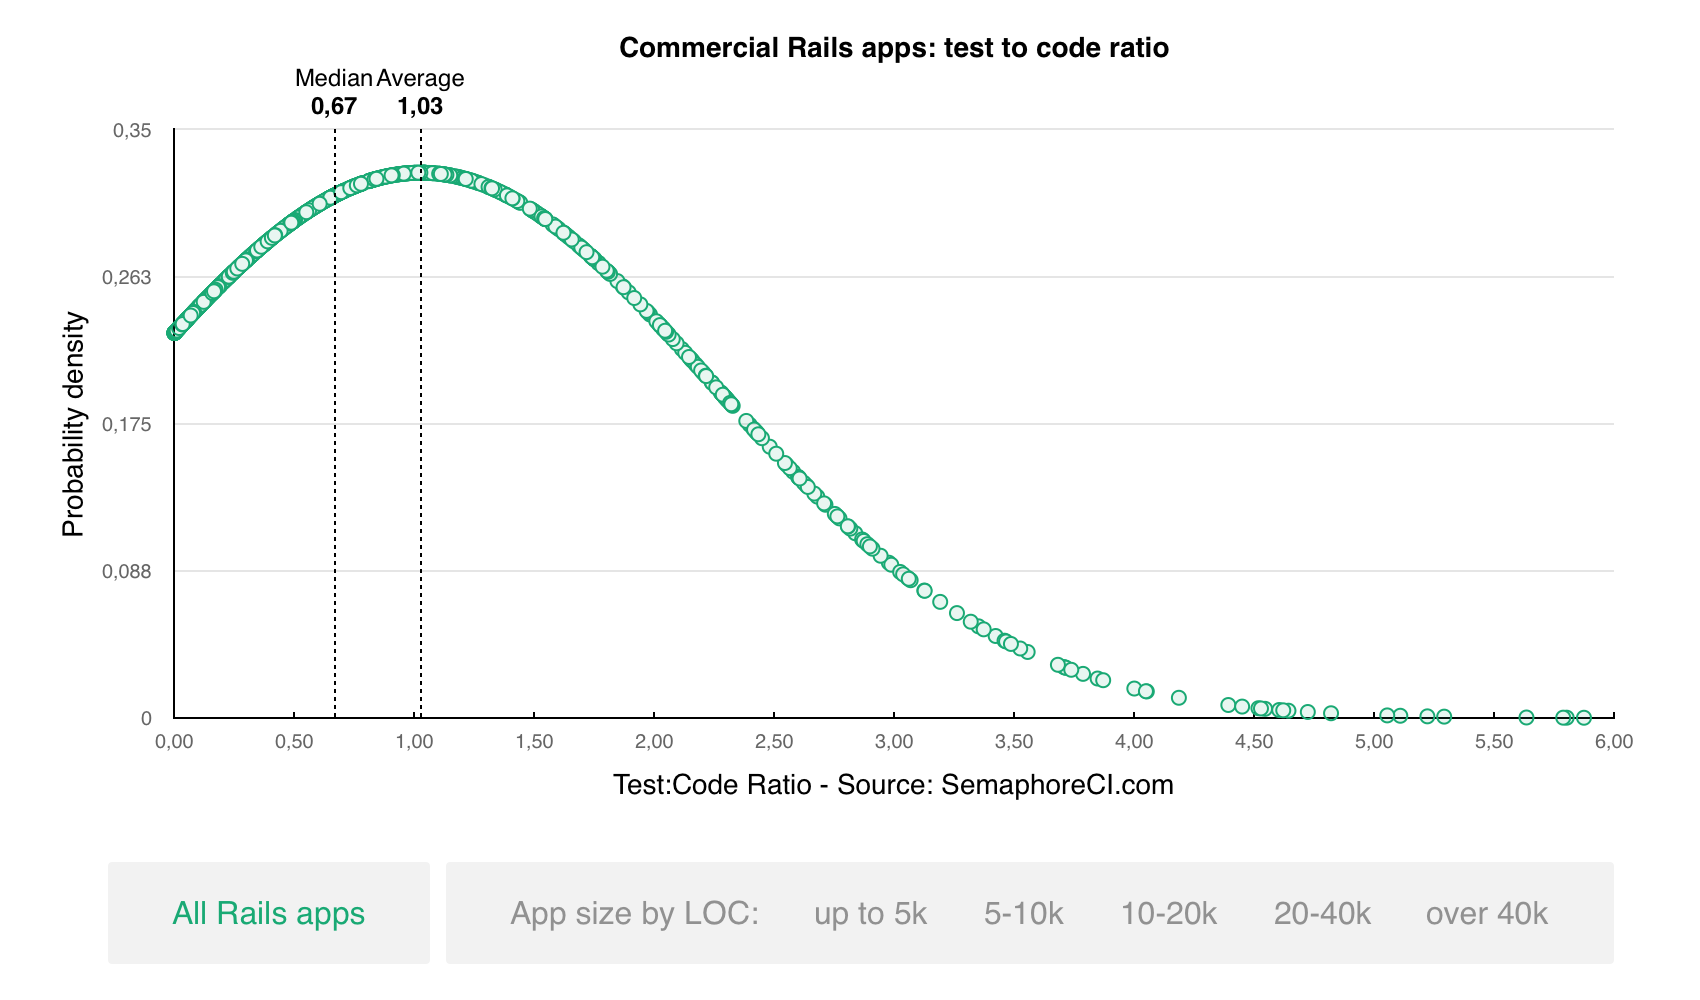 Commercial Rails apps test to code ratio by code size distribution